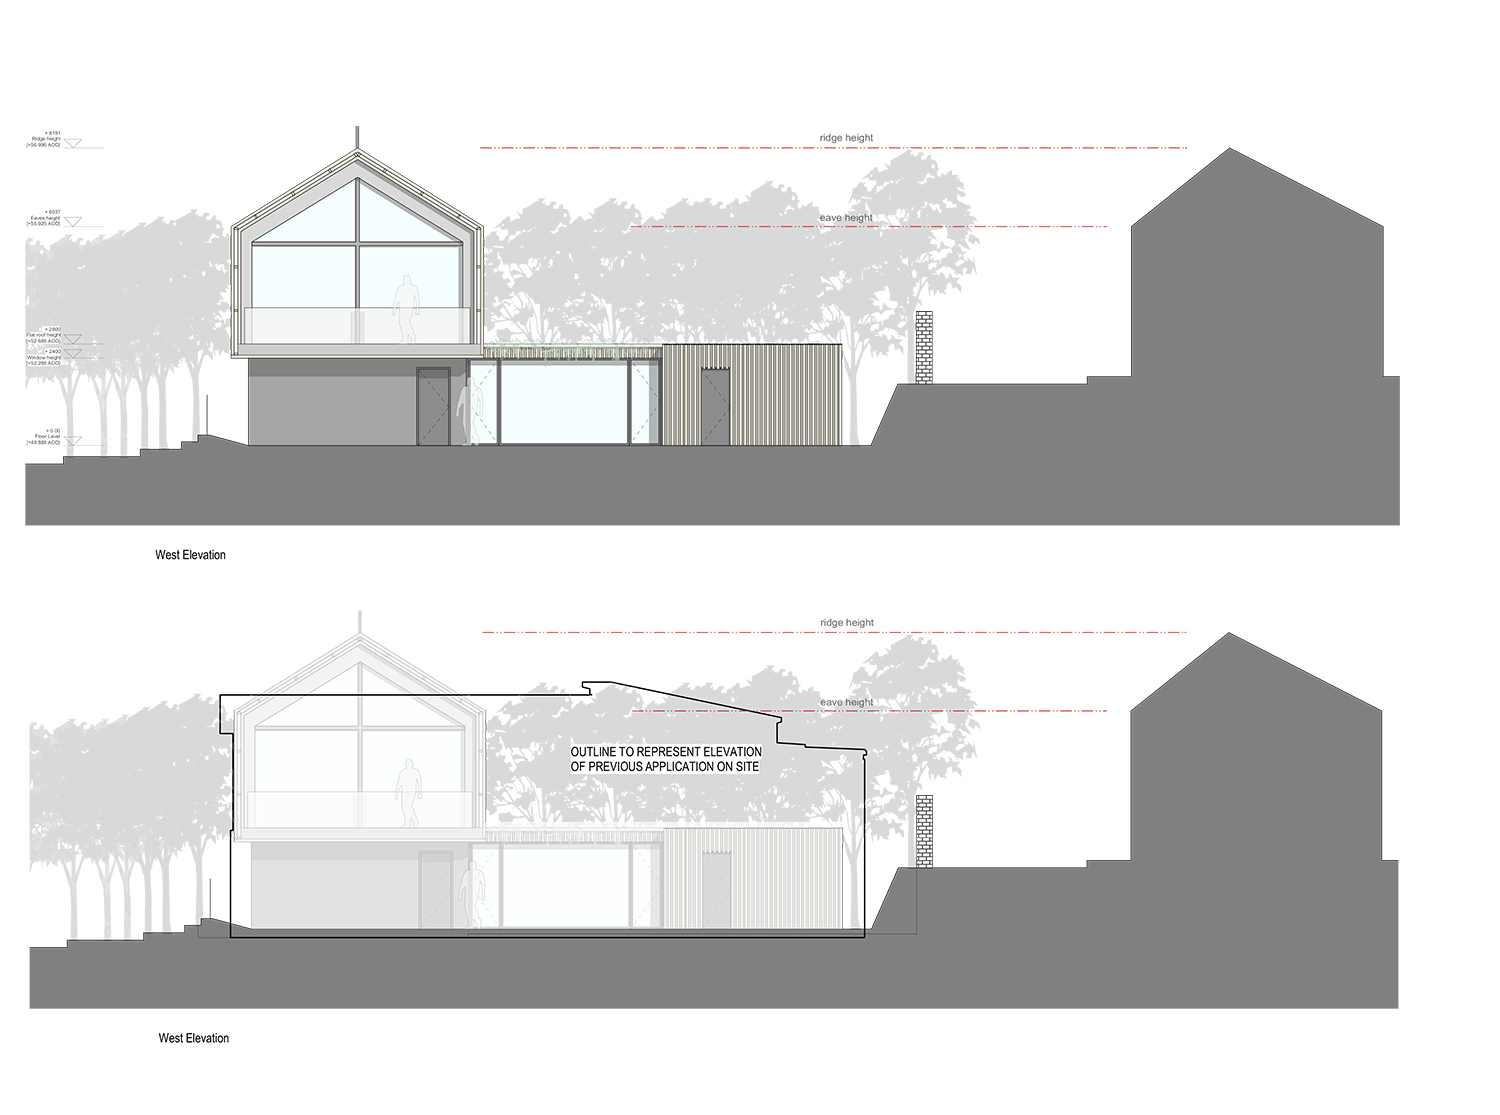 Jersey Planning Approval planning 